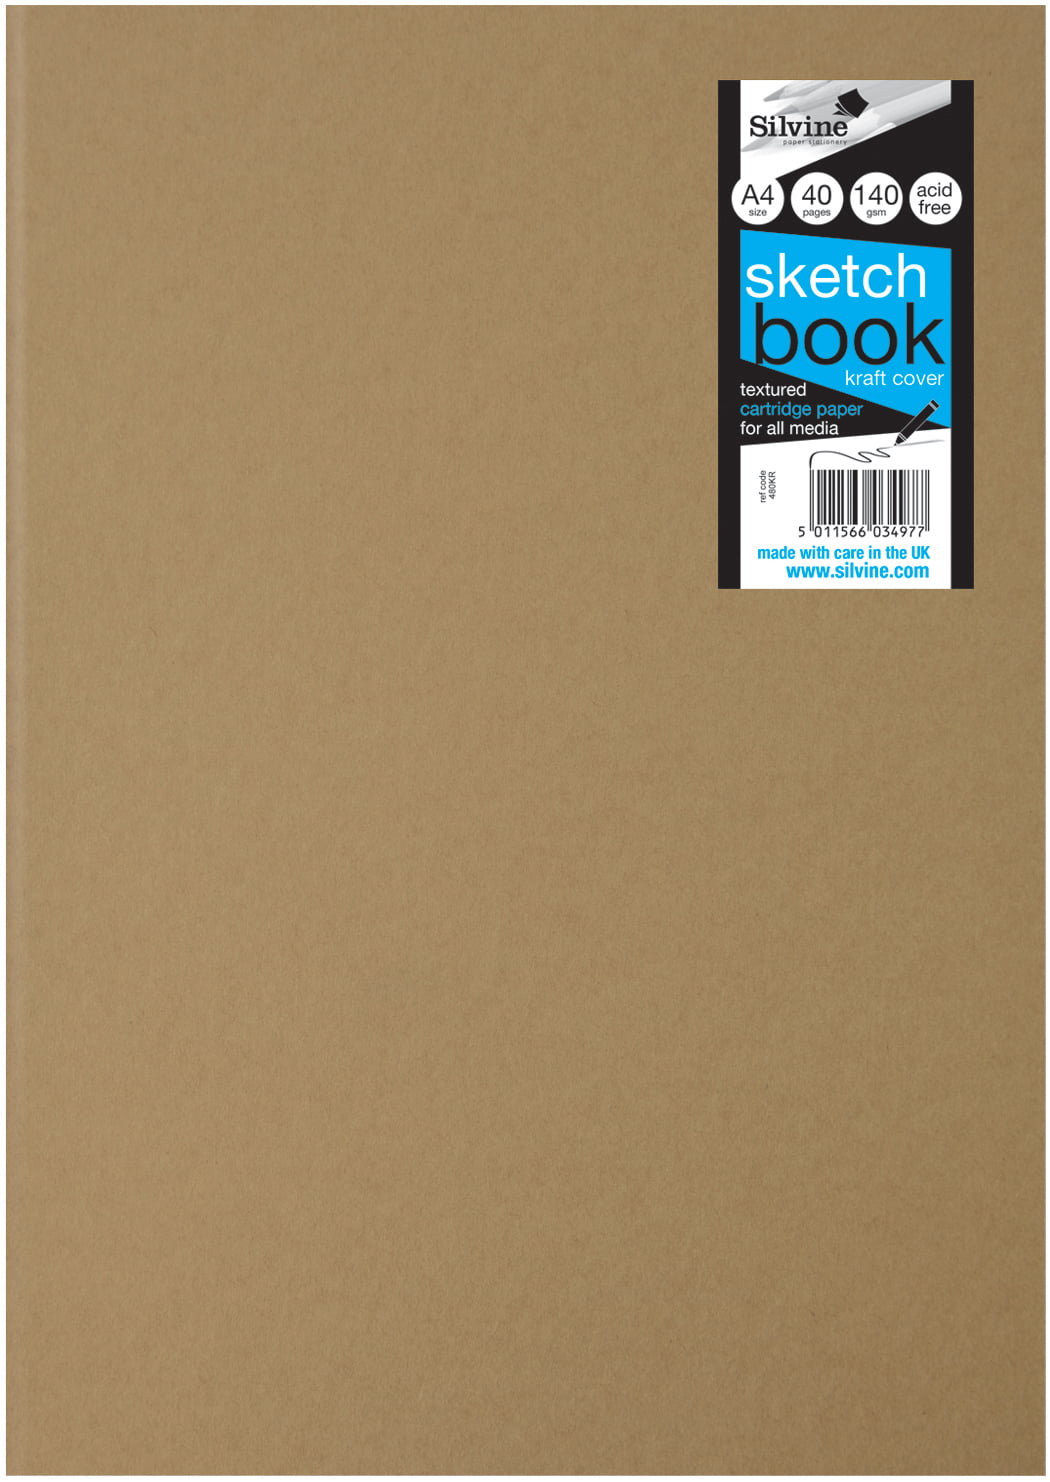 48 Sheets Silvine A4 Portrait Casebound Sketchbook 96 Pages 140gsm Textured White Cartridge Paper